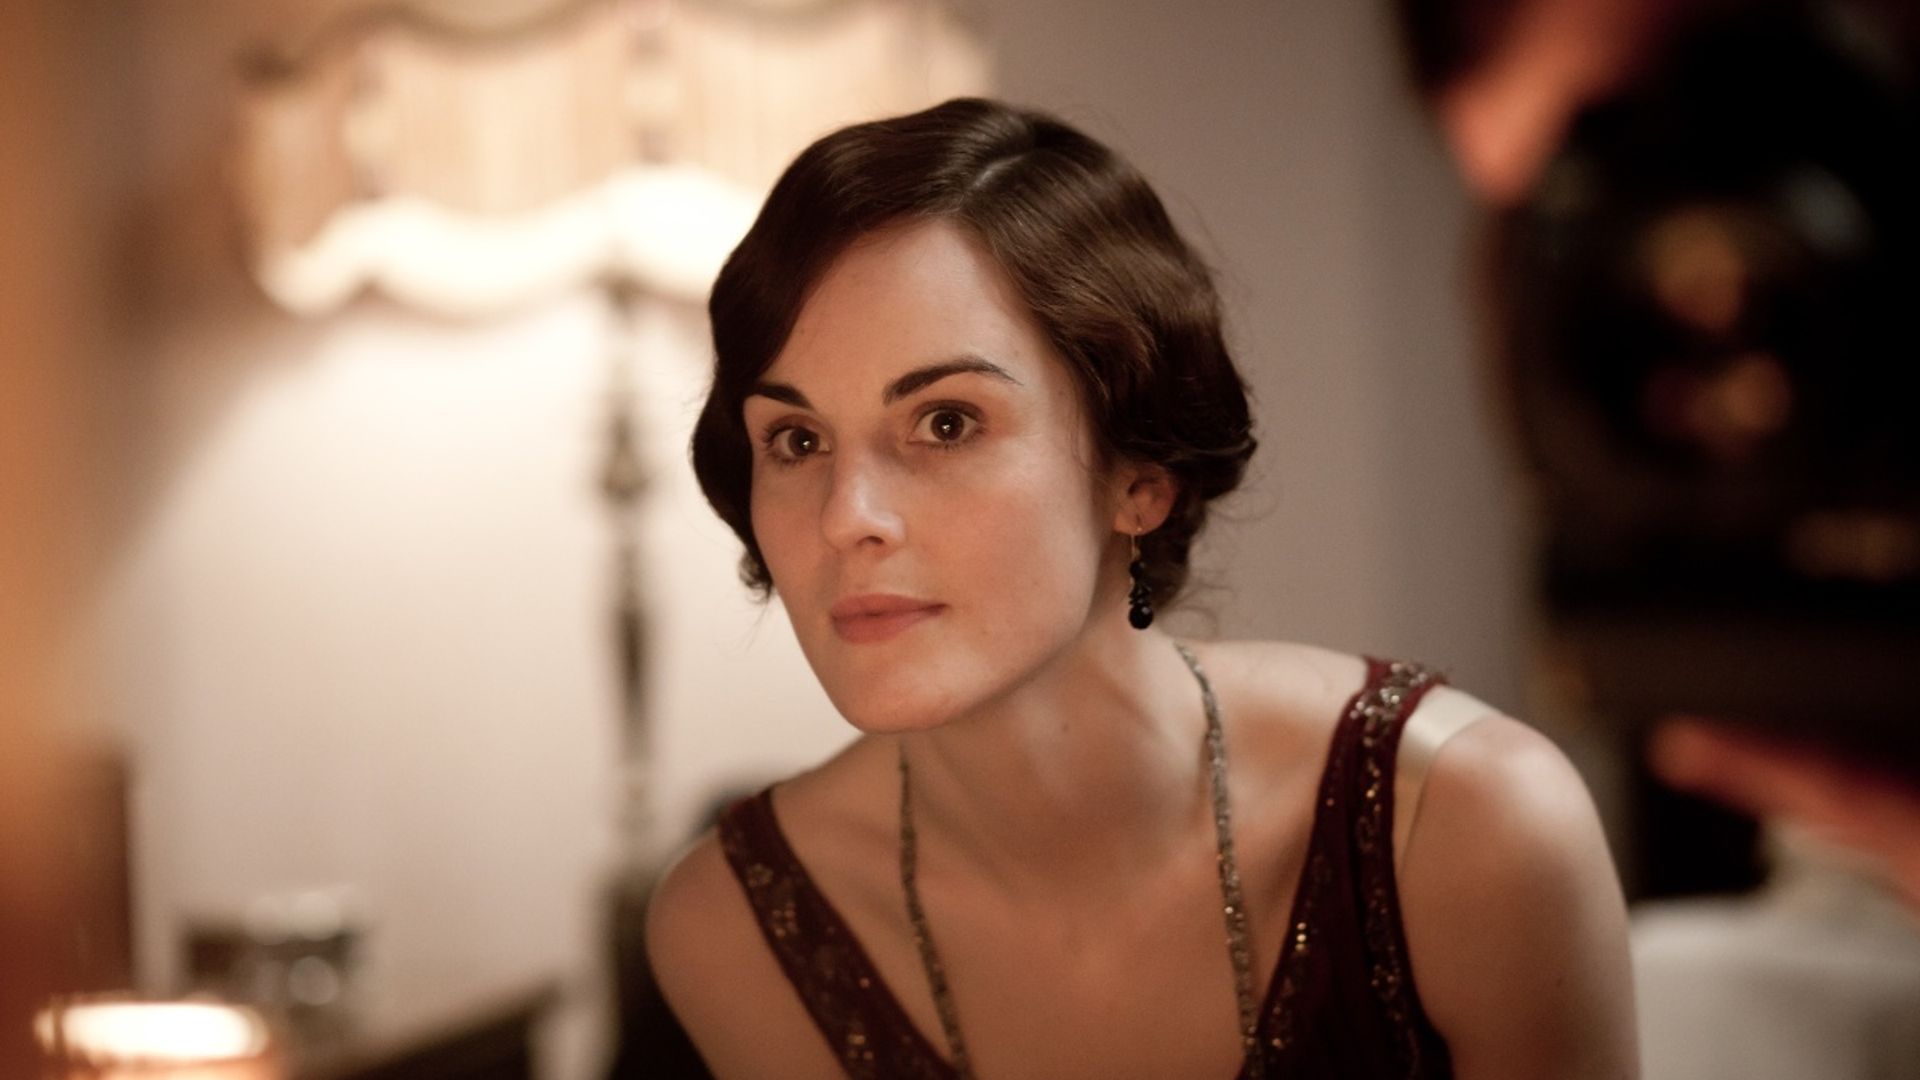 Downton Abbey's Michelle Dockery to star in new Netflix drama - get the details 